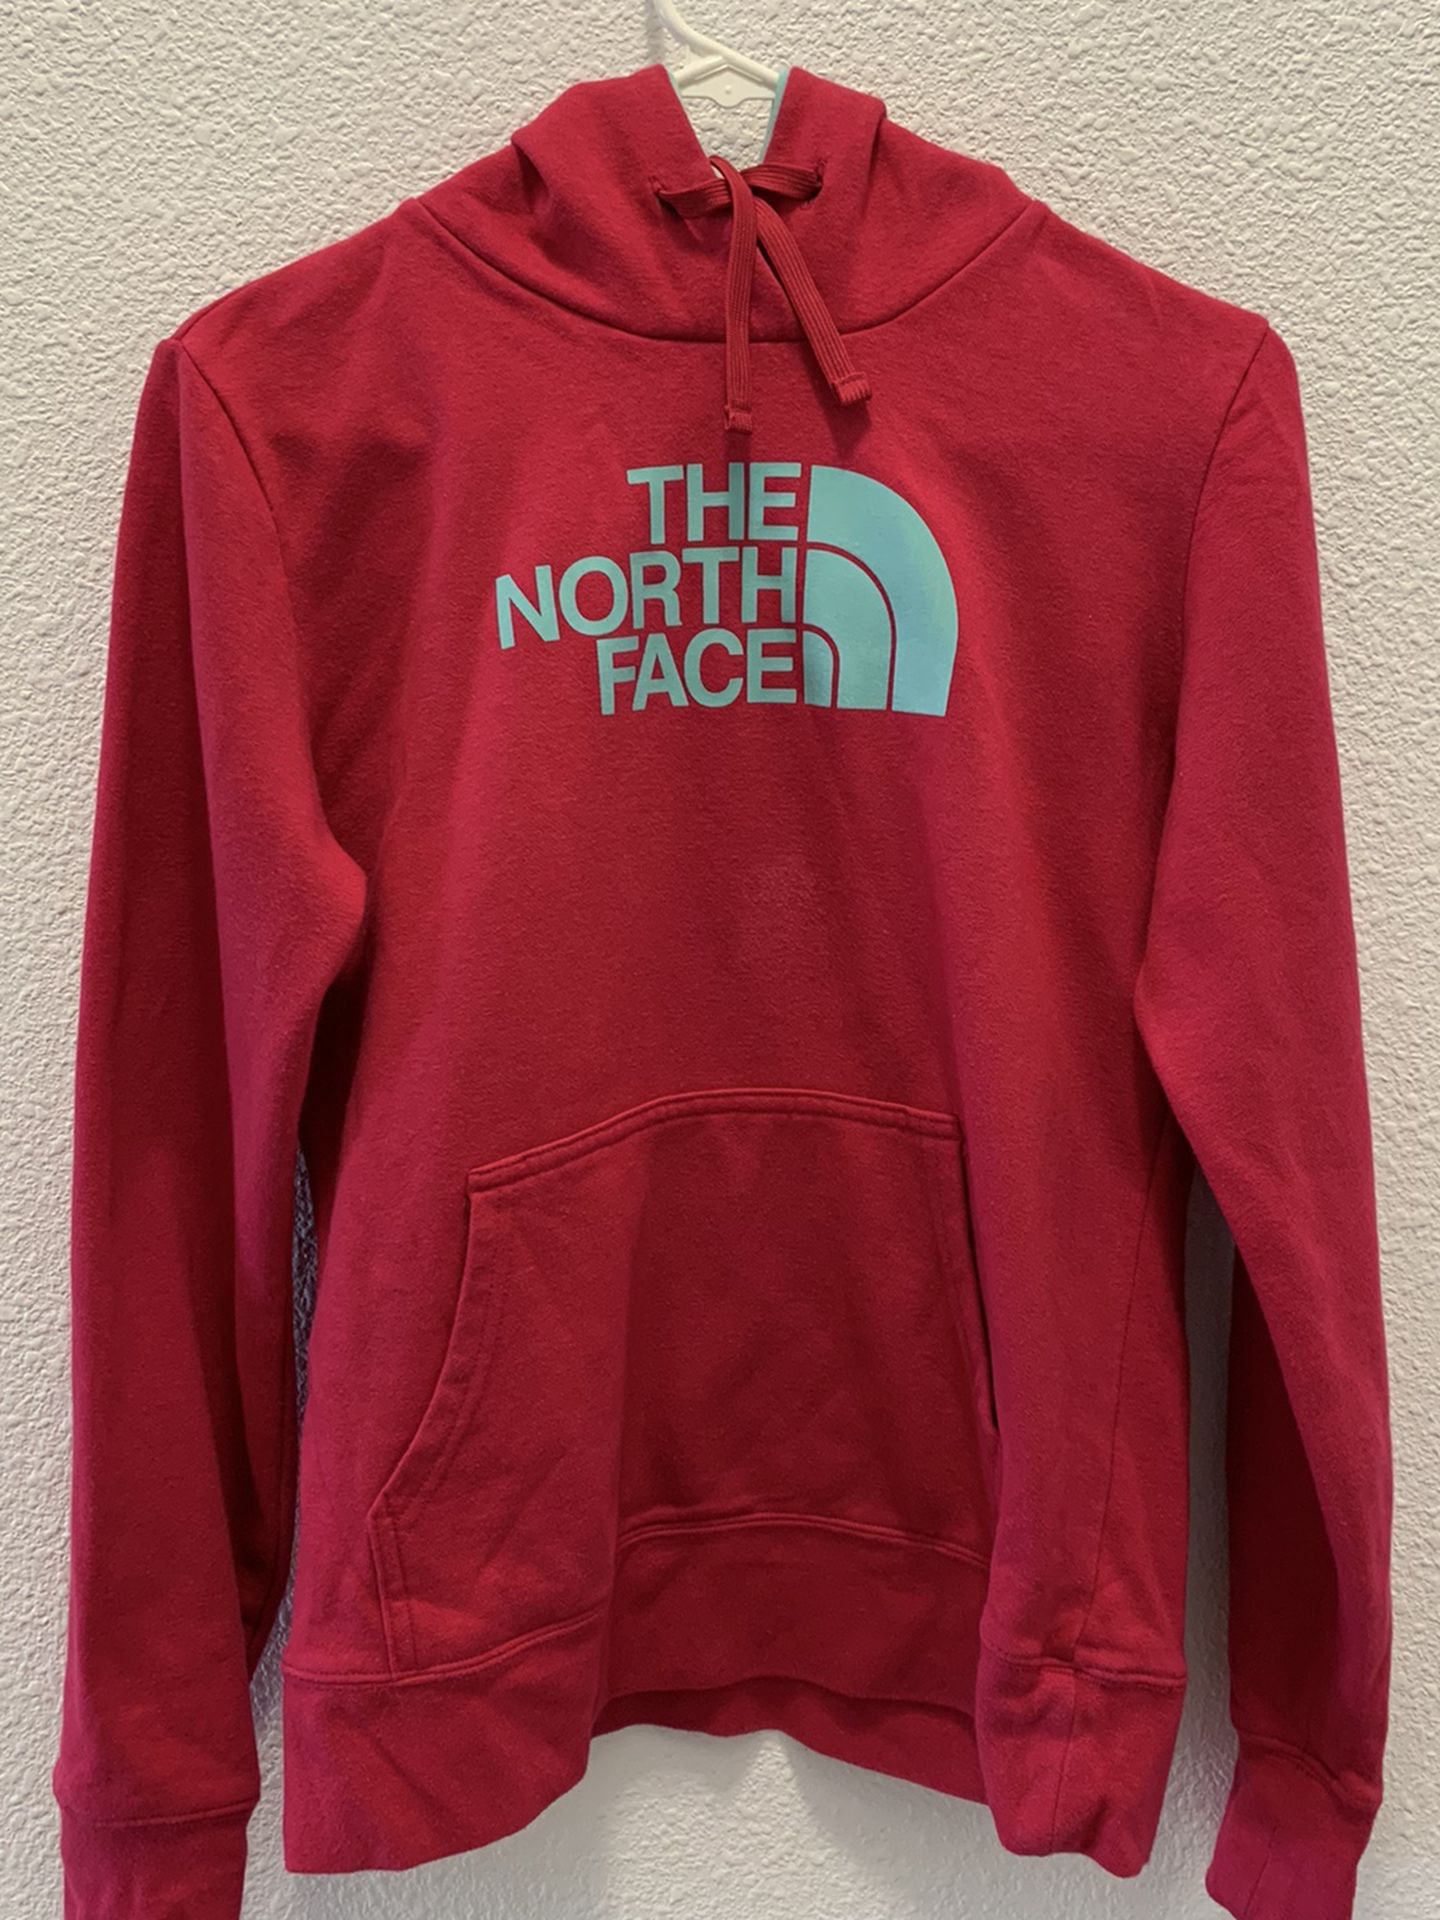 NORTH FACE®️ OFFICIAL HOODIE - VIBRANT COLORS - NO SIGNS OF WEAR - SIZE SMALL